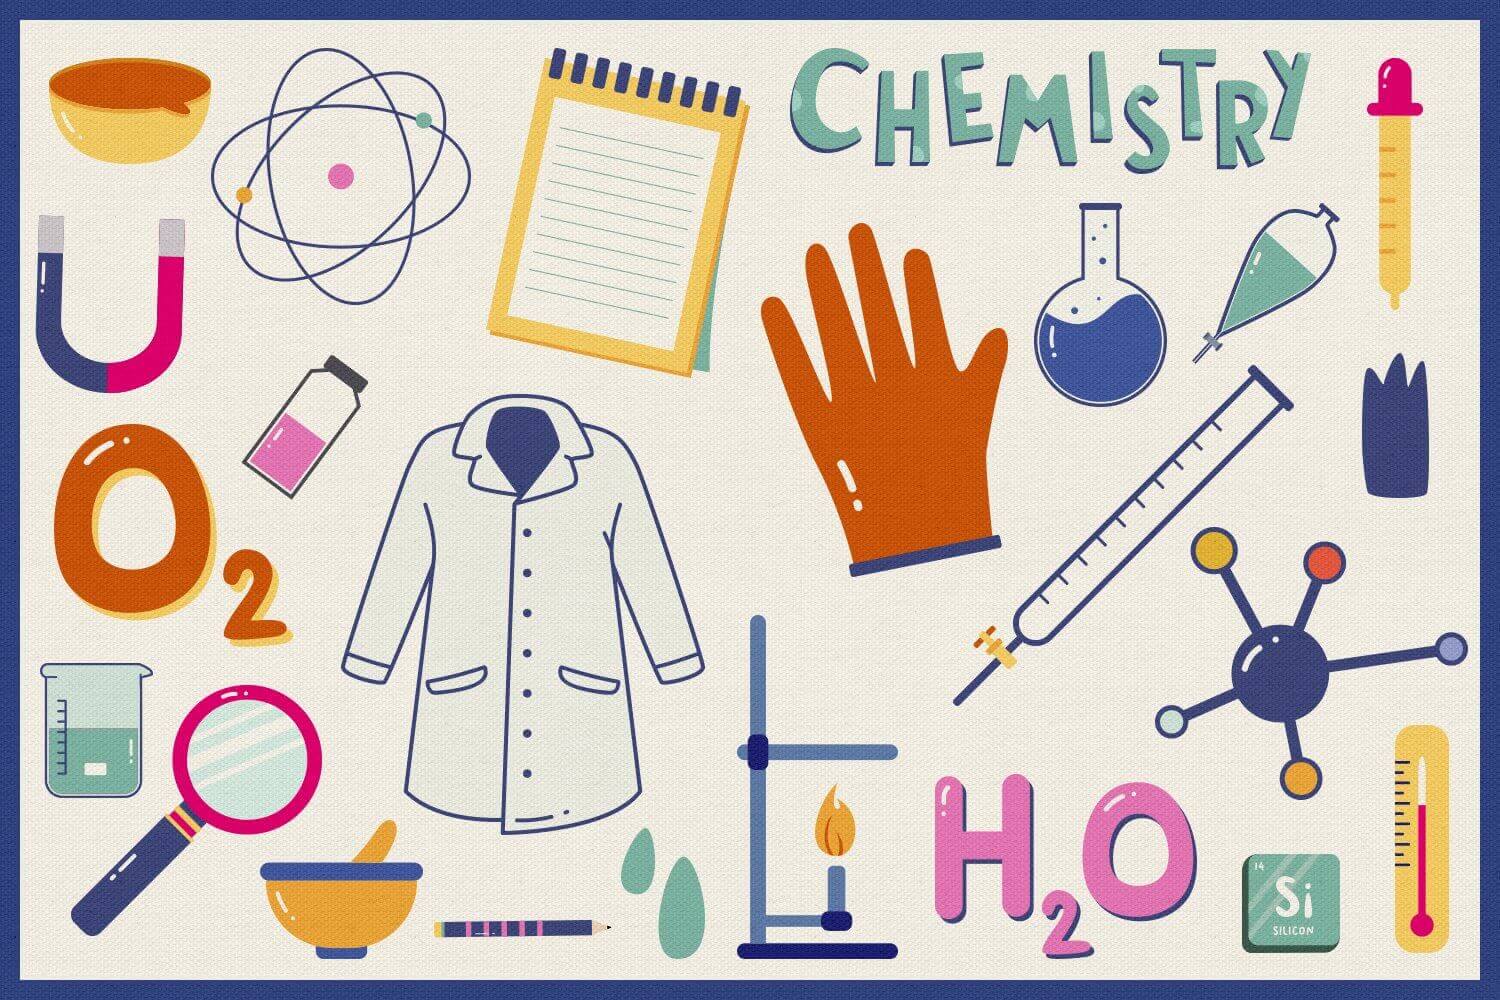 Drawings of molecules, a magnifying glass, a pencil, chemical elements - everything related to chemistry.